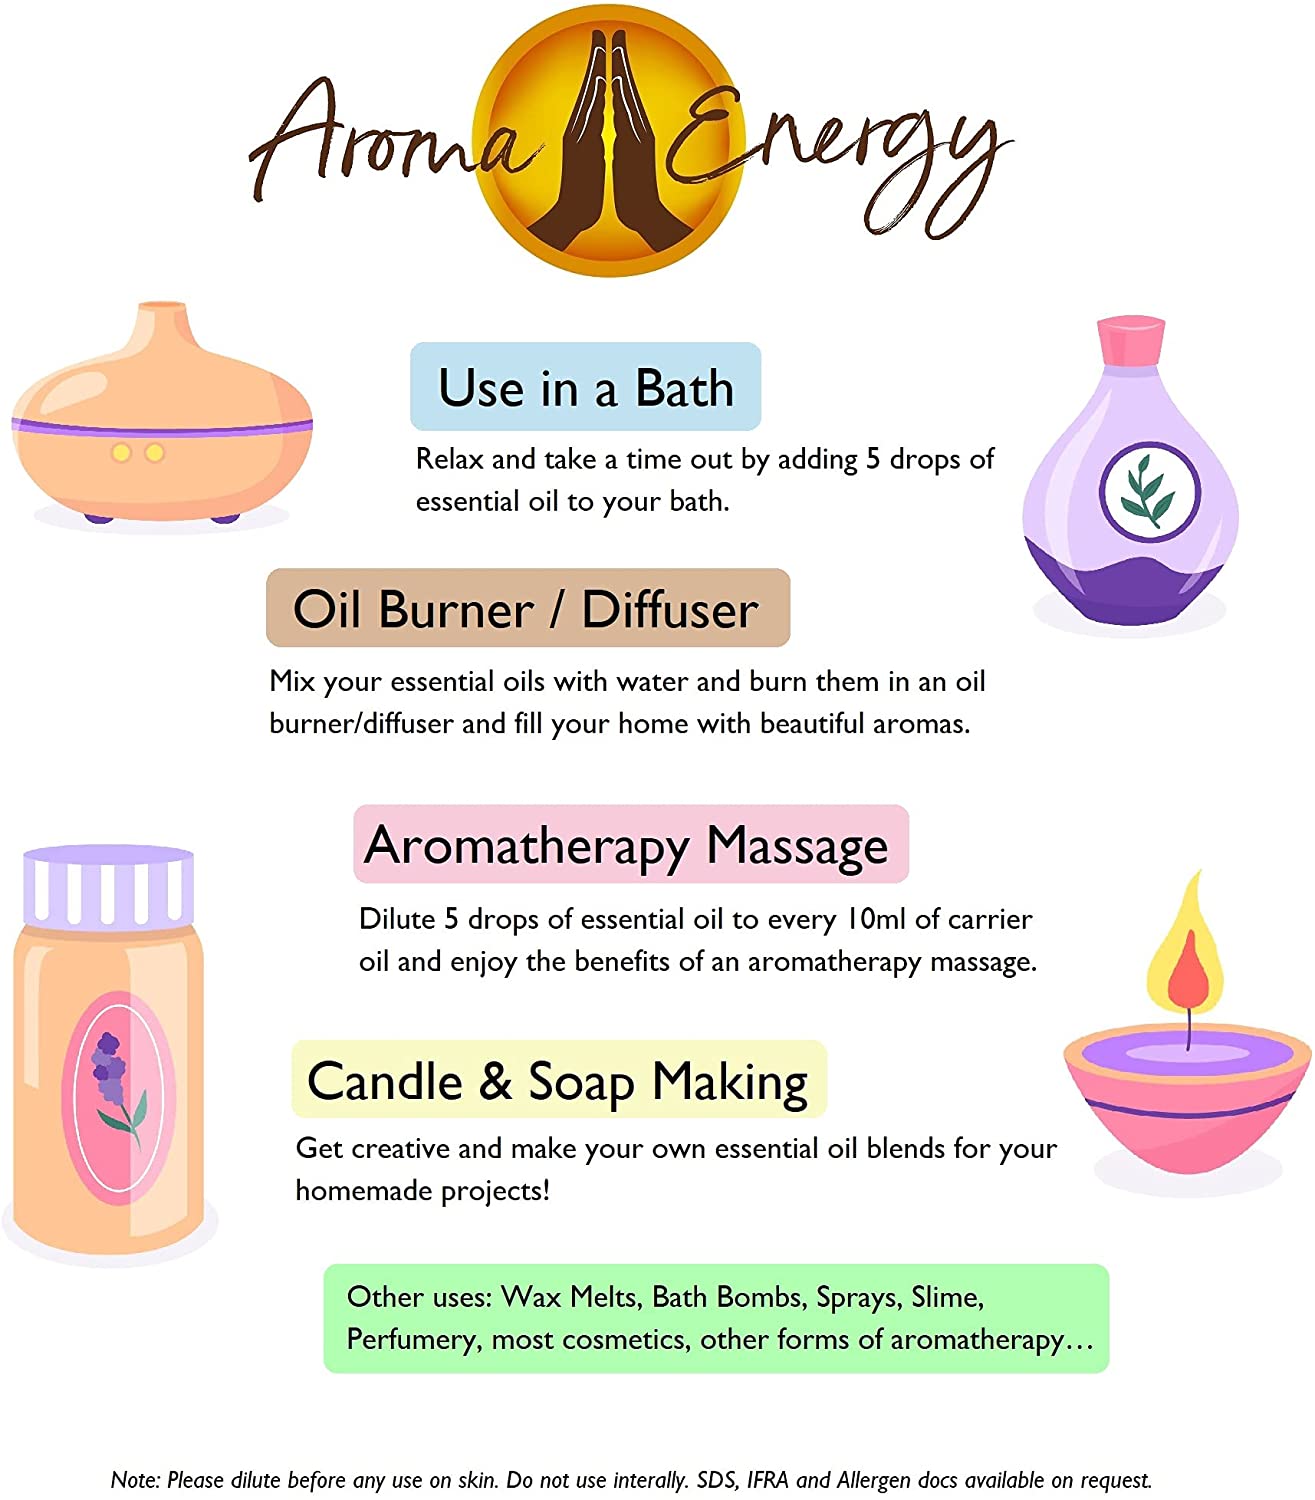 May Chang Pure Essential Oil - Aroma Energy